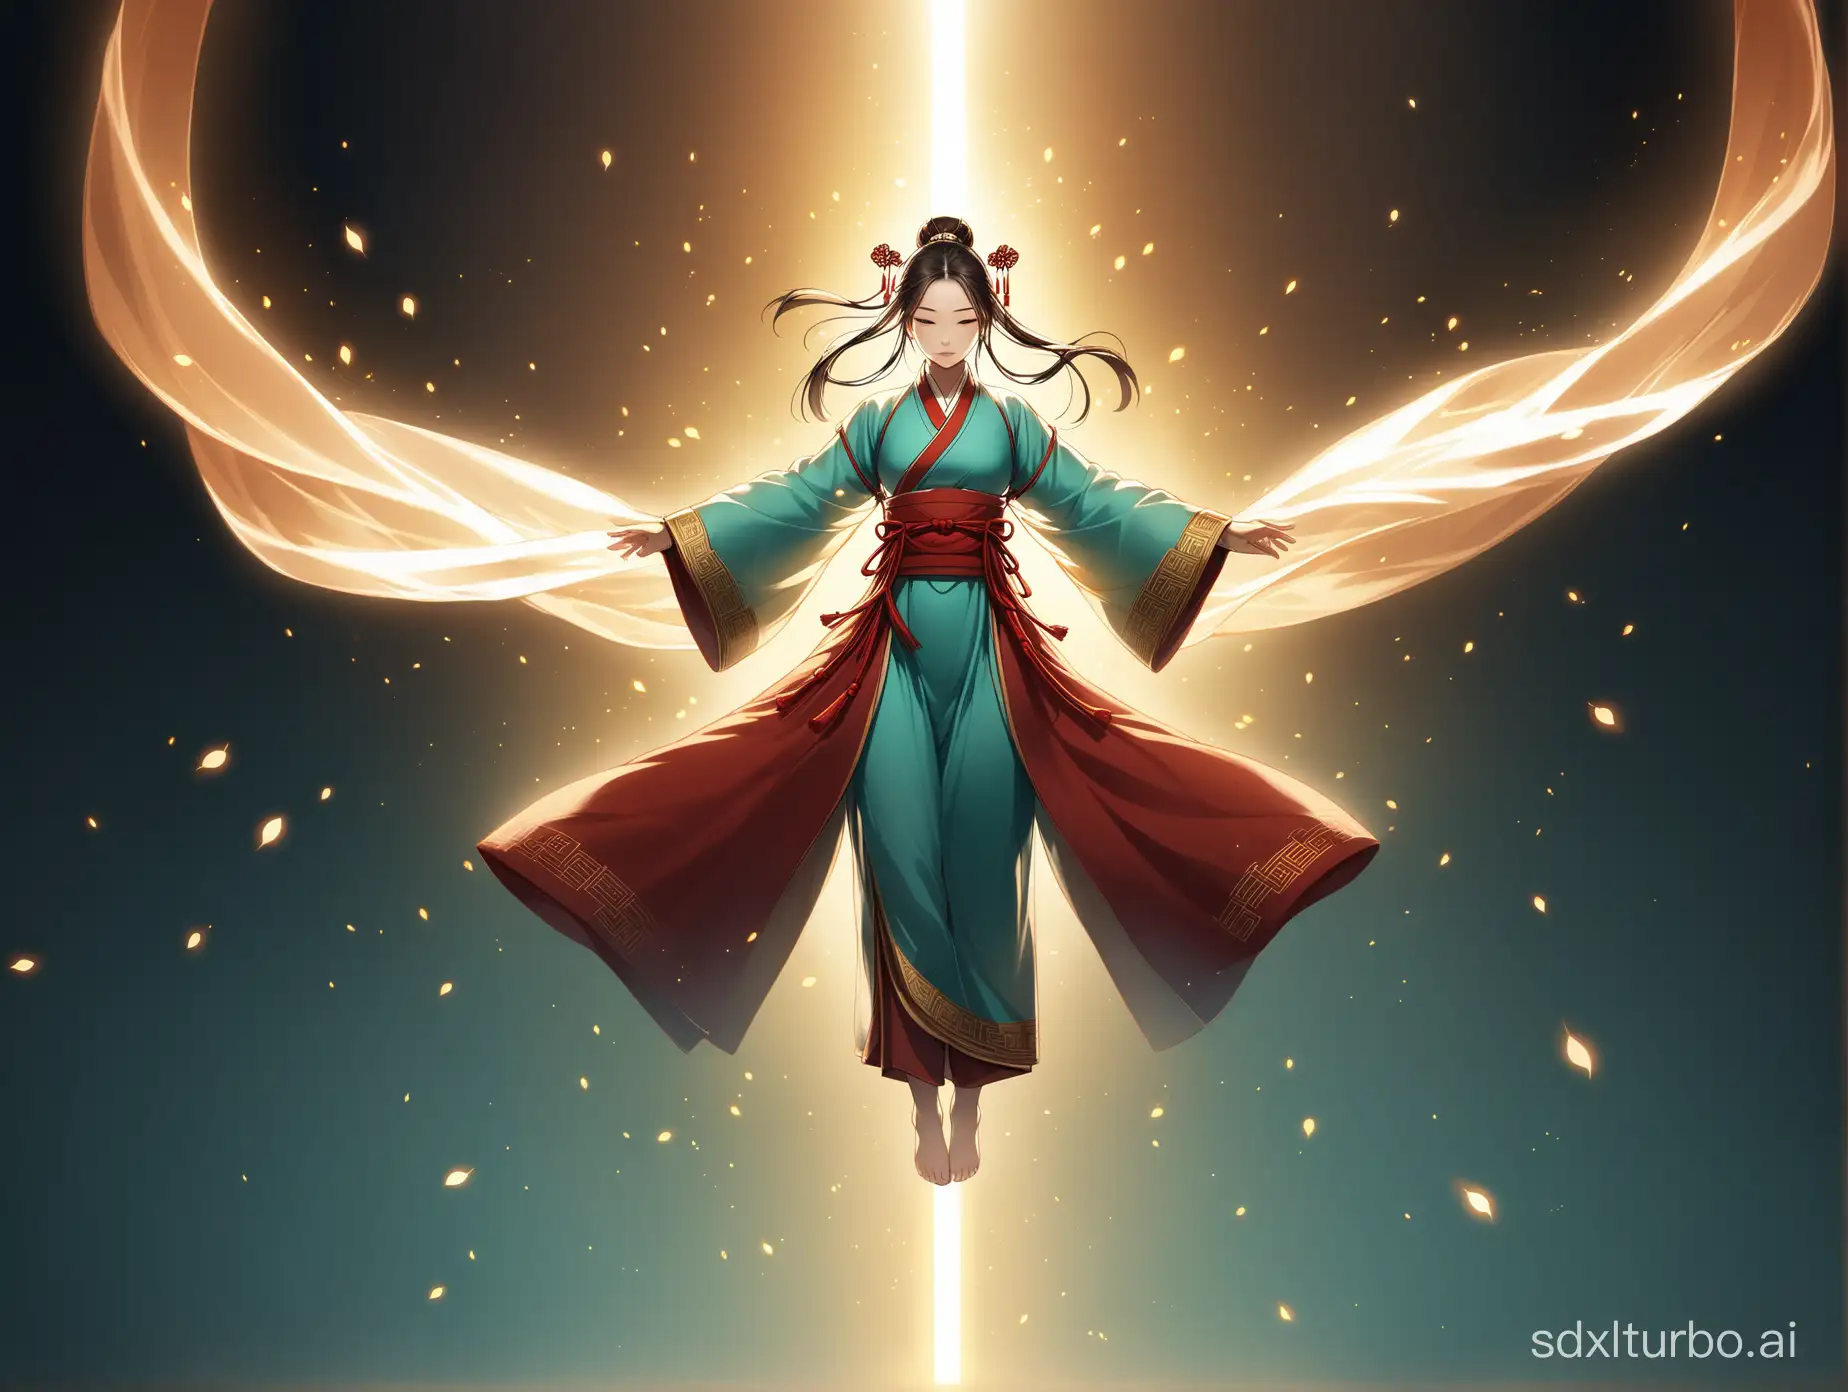 A figure wearing ancient Chinese clothing, facing forward, floating in mid-air, emitting light from their body.